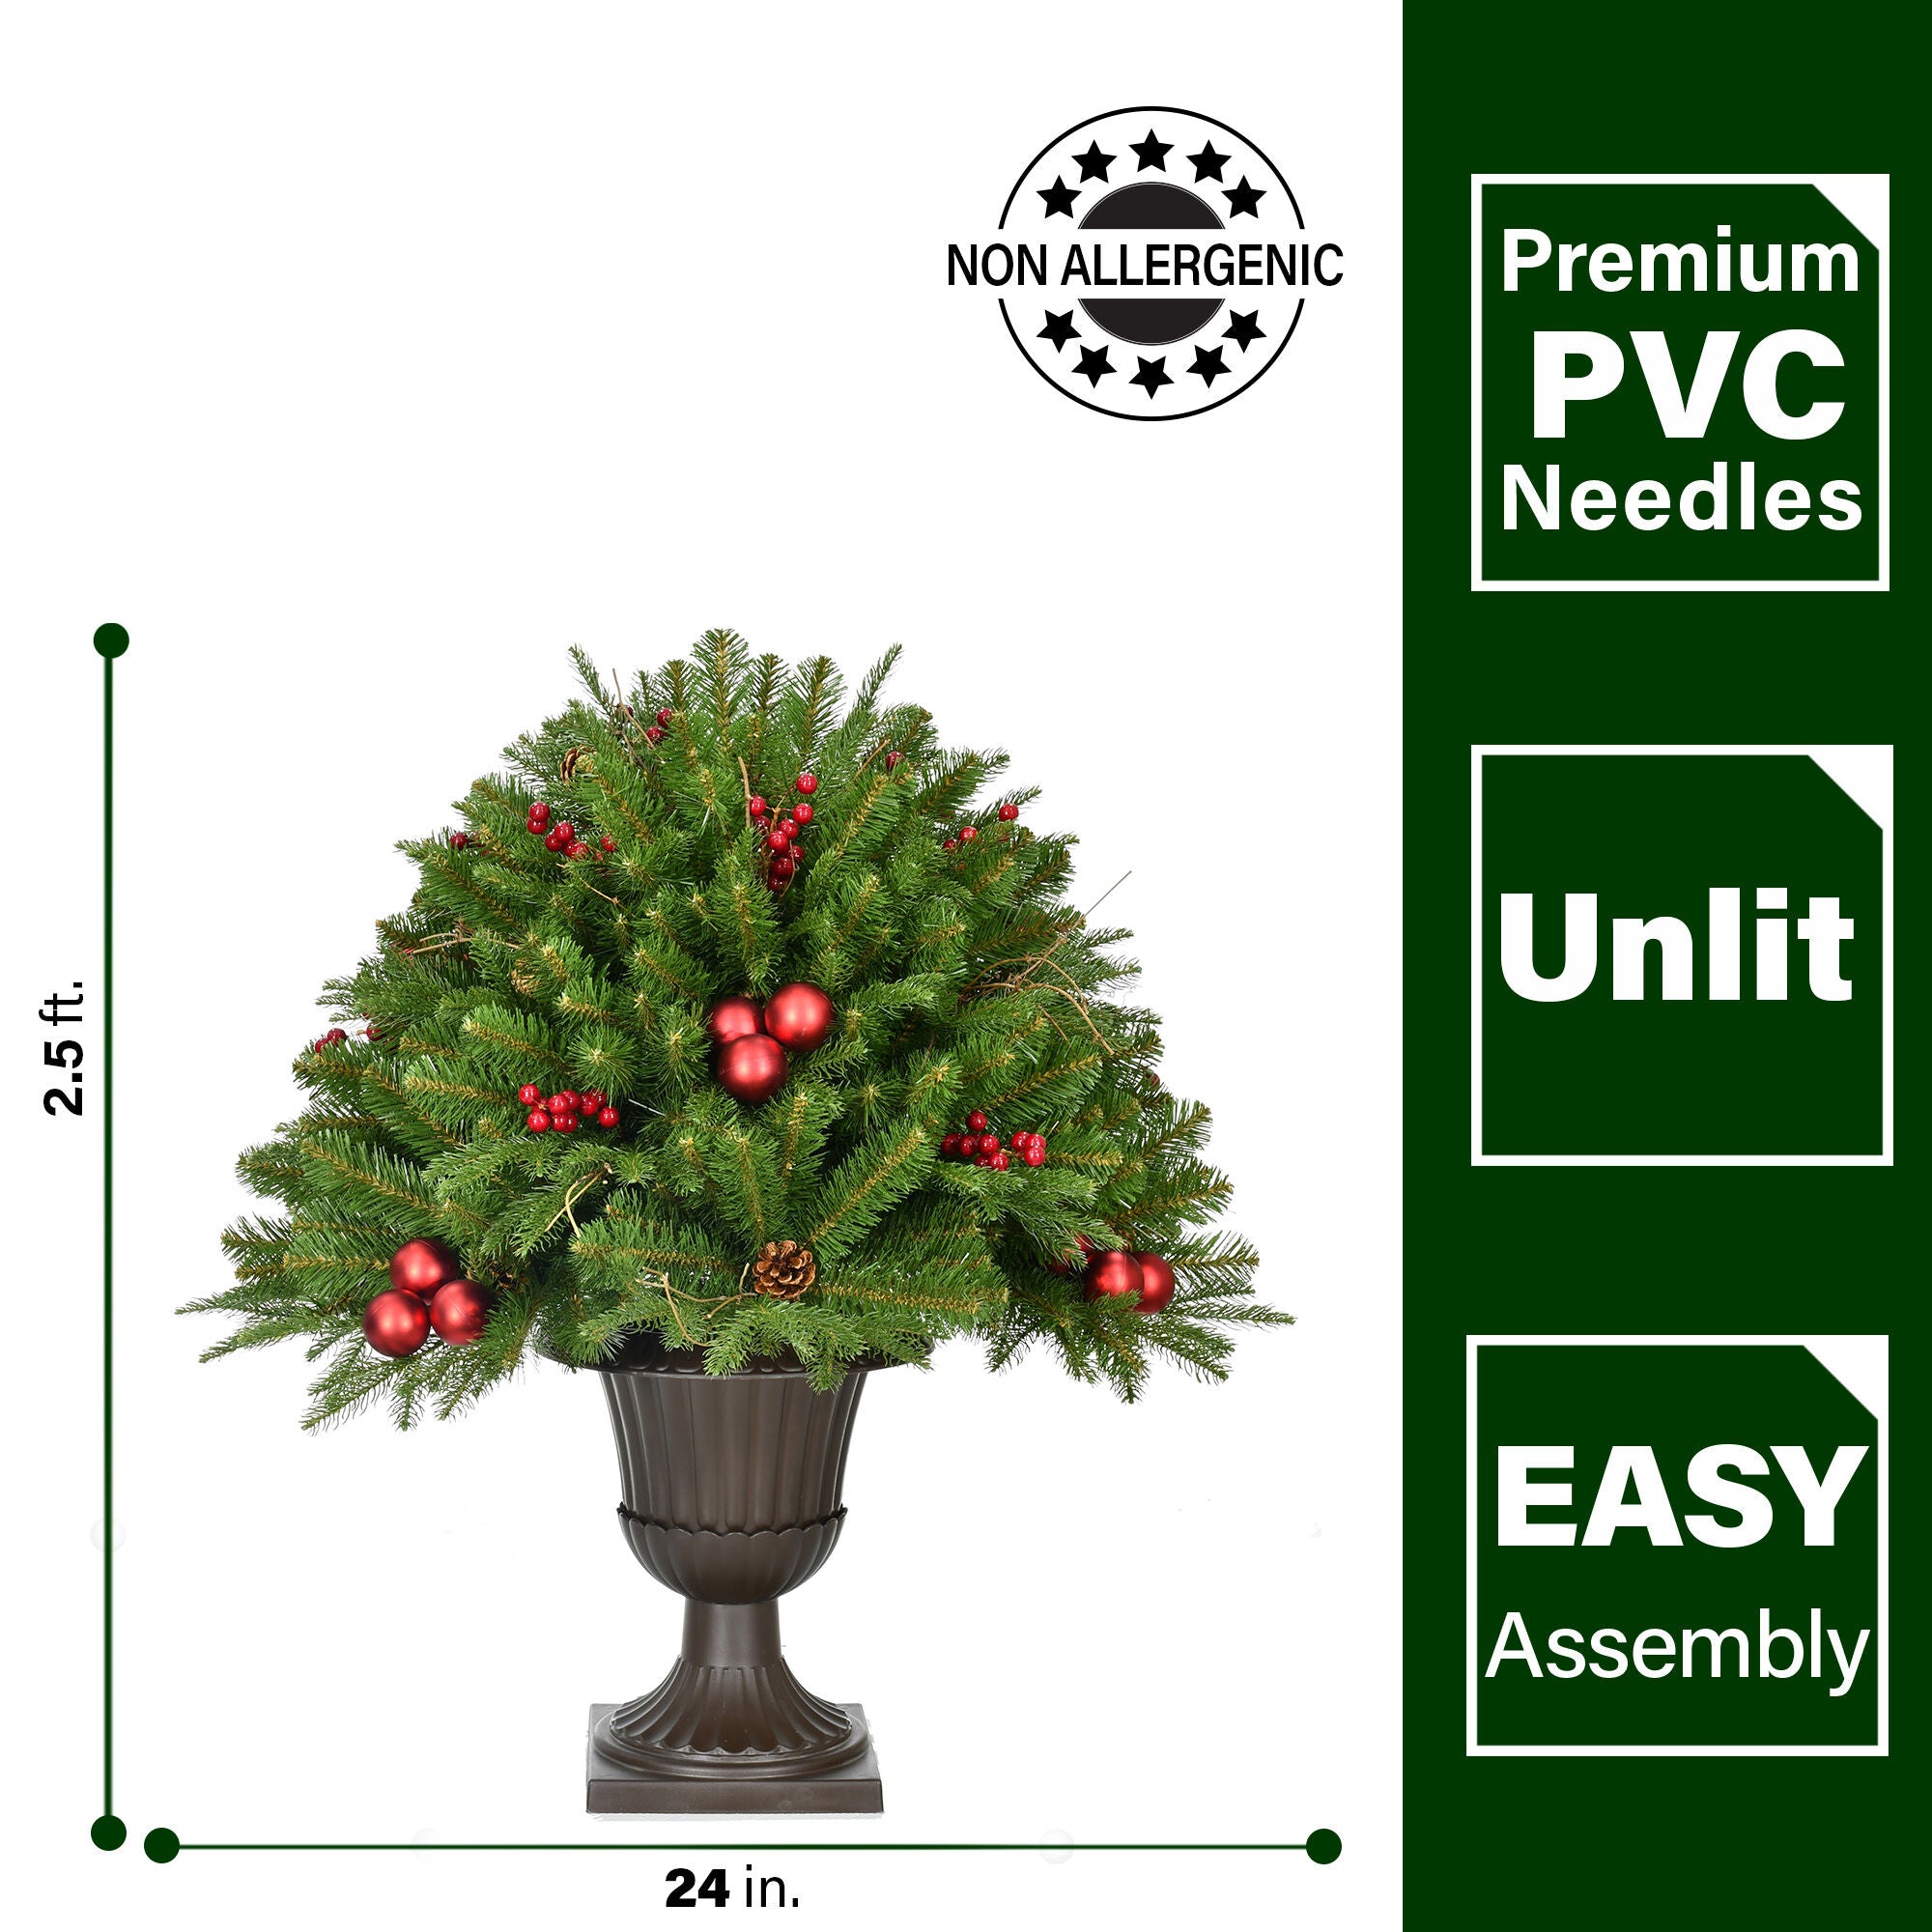 Fraser Hill Farm -  2.5-Ft. Joyful Porch Tree in Pedestal Urn with Pinecones, Berries, and Ornaments